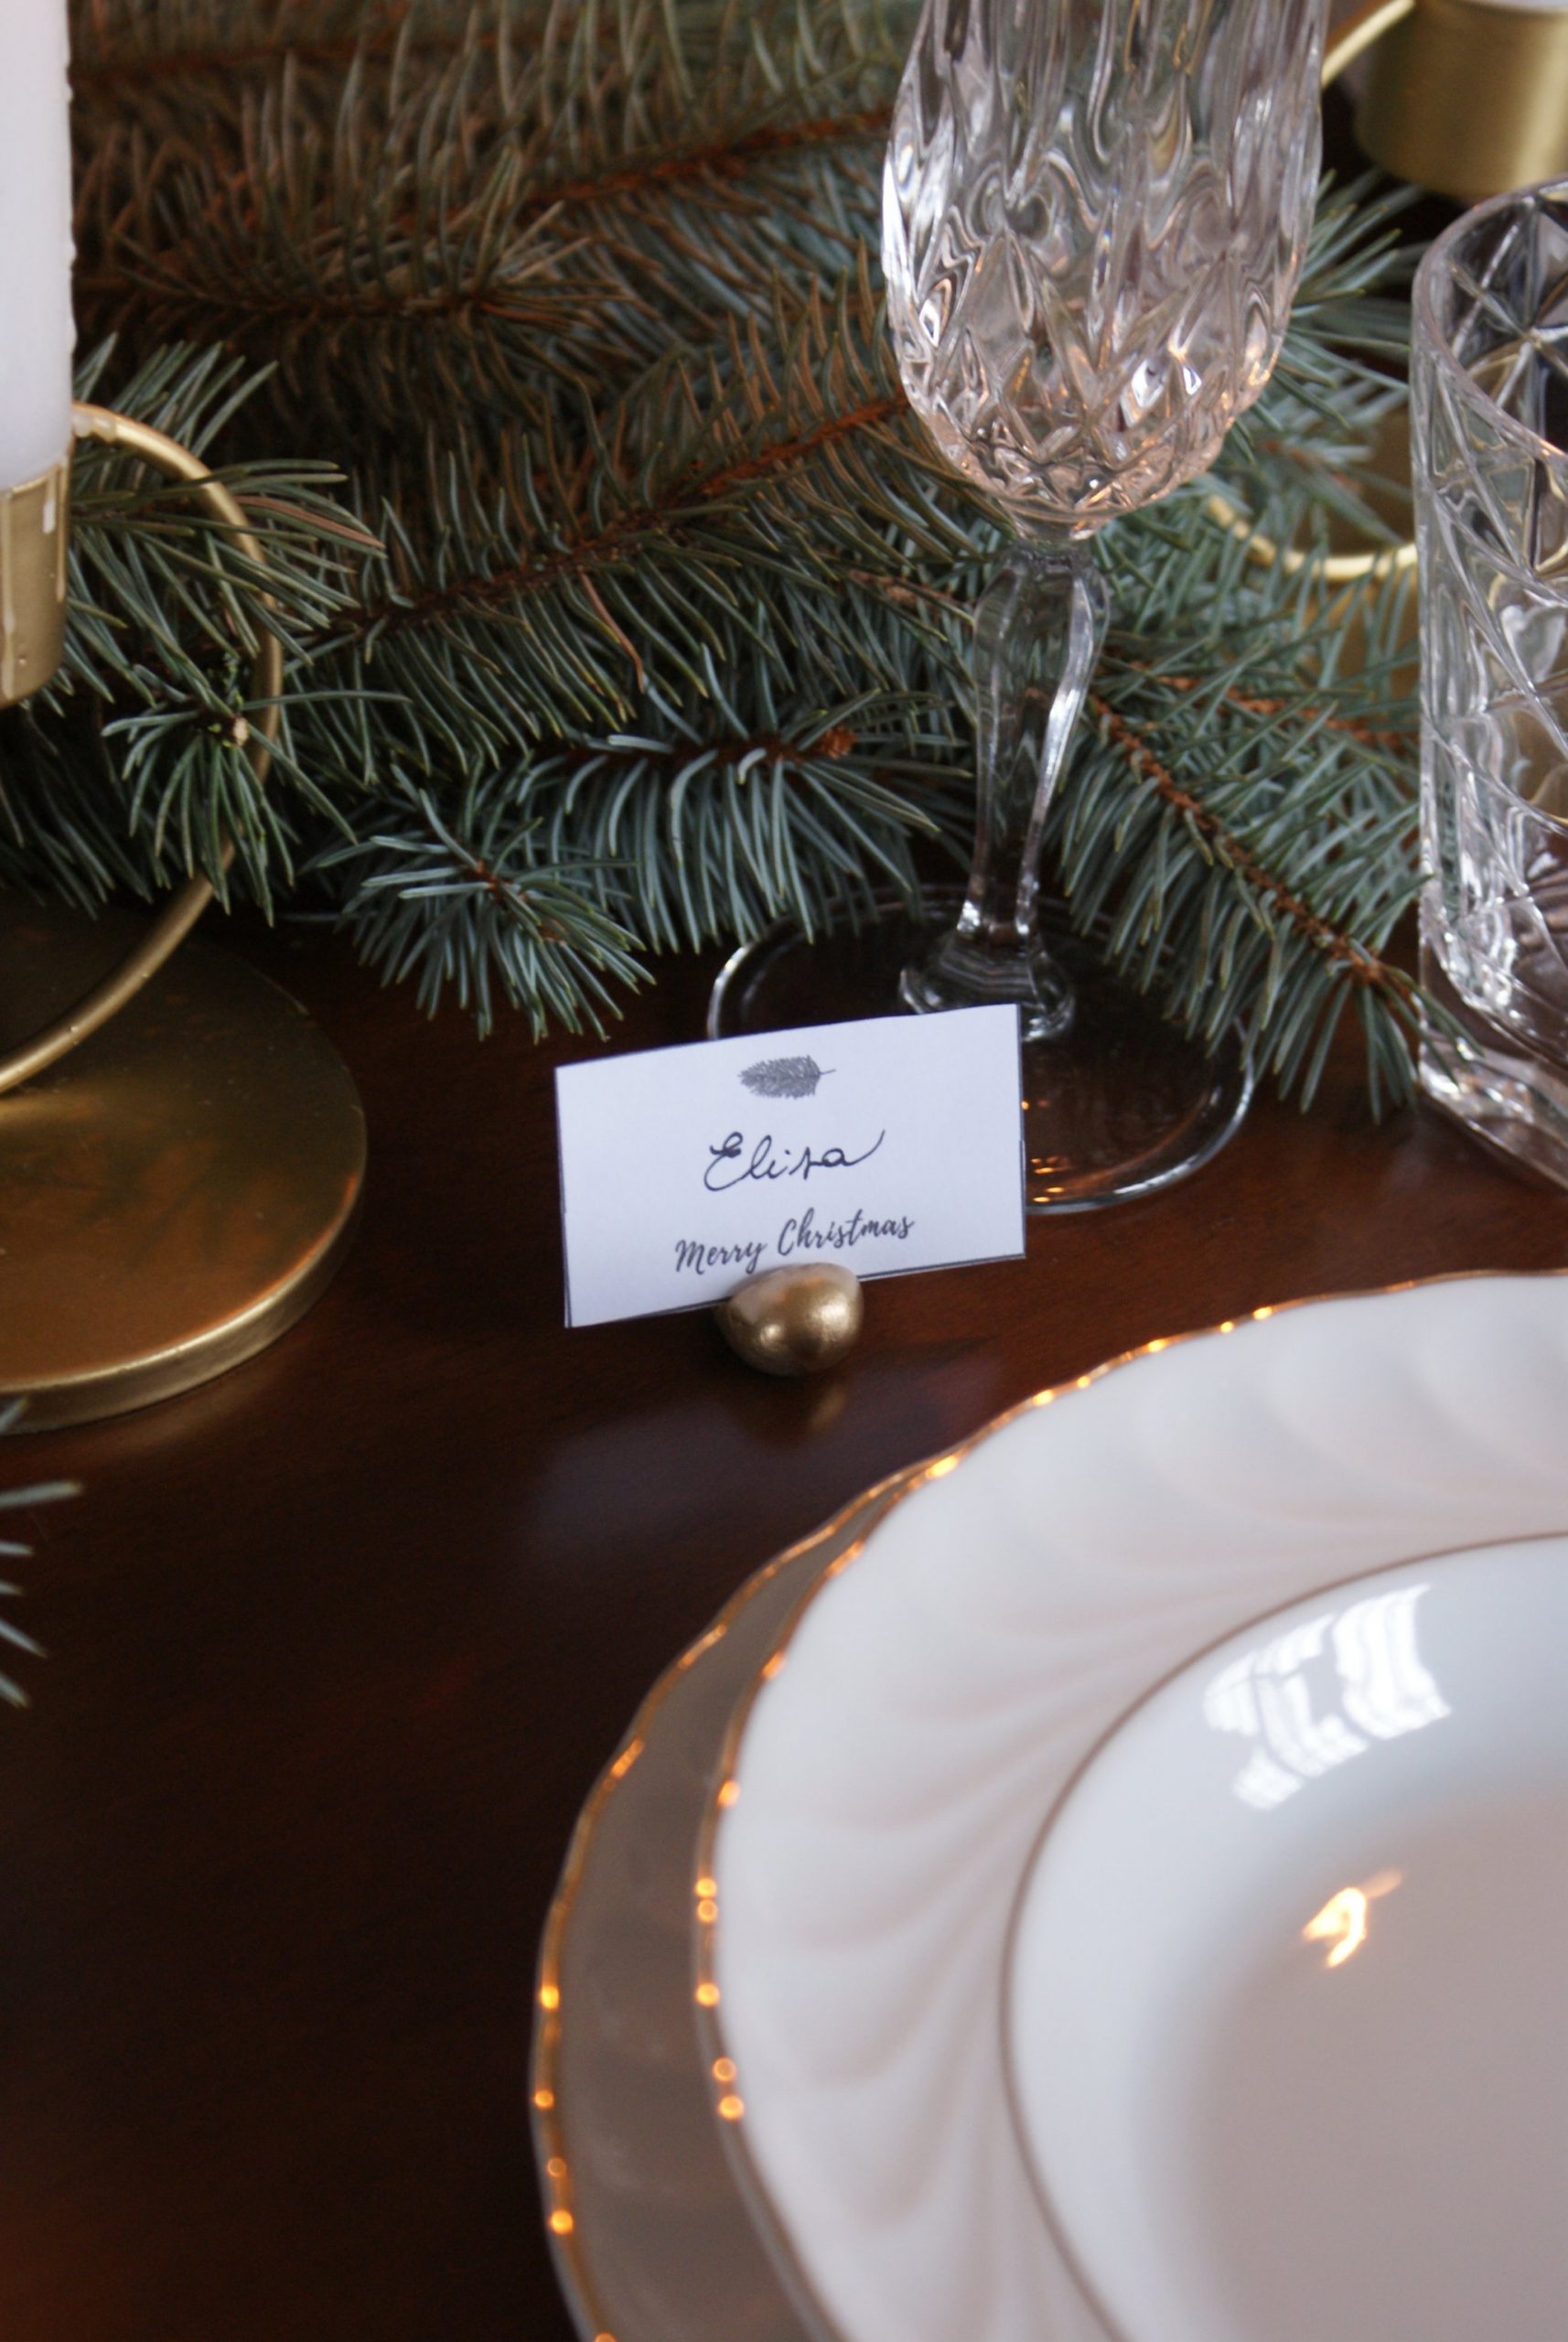 DIY PLACE CARD HOLDERS FOR THE CHRISTMAS TABLE (WITH FREE PRINTABLE CARDS)